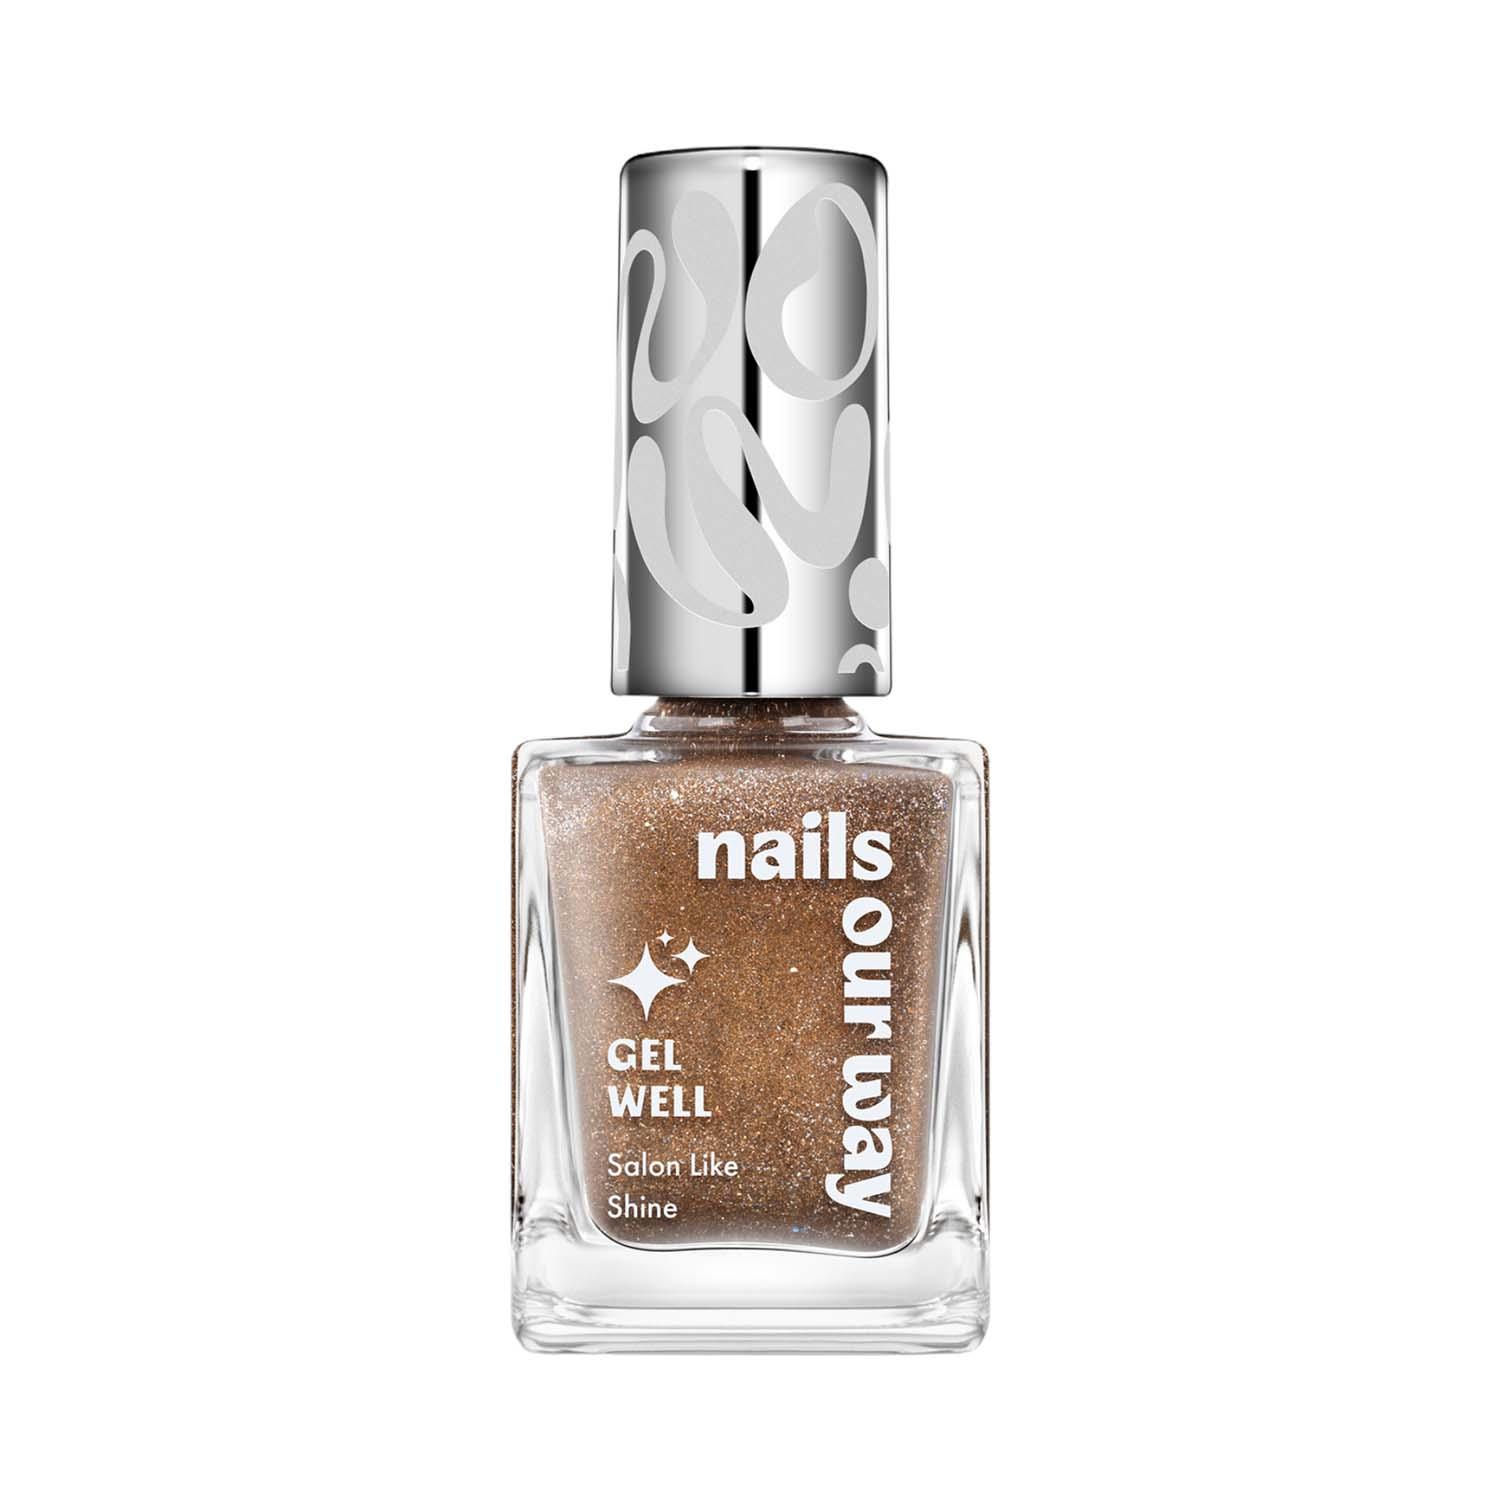 Nails Our Way | Nails Our Way Gel Well Nail Enamel - 509 Incredible (10 ml)